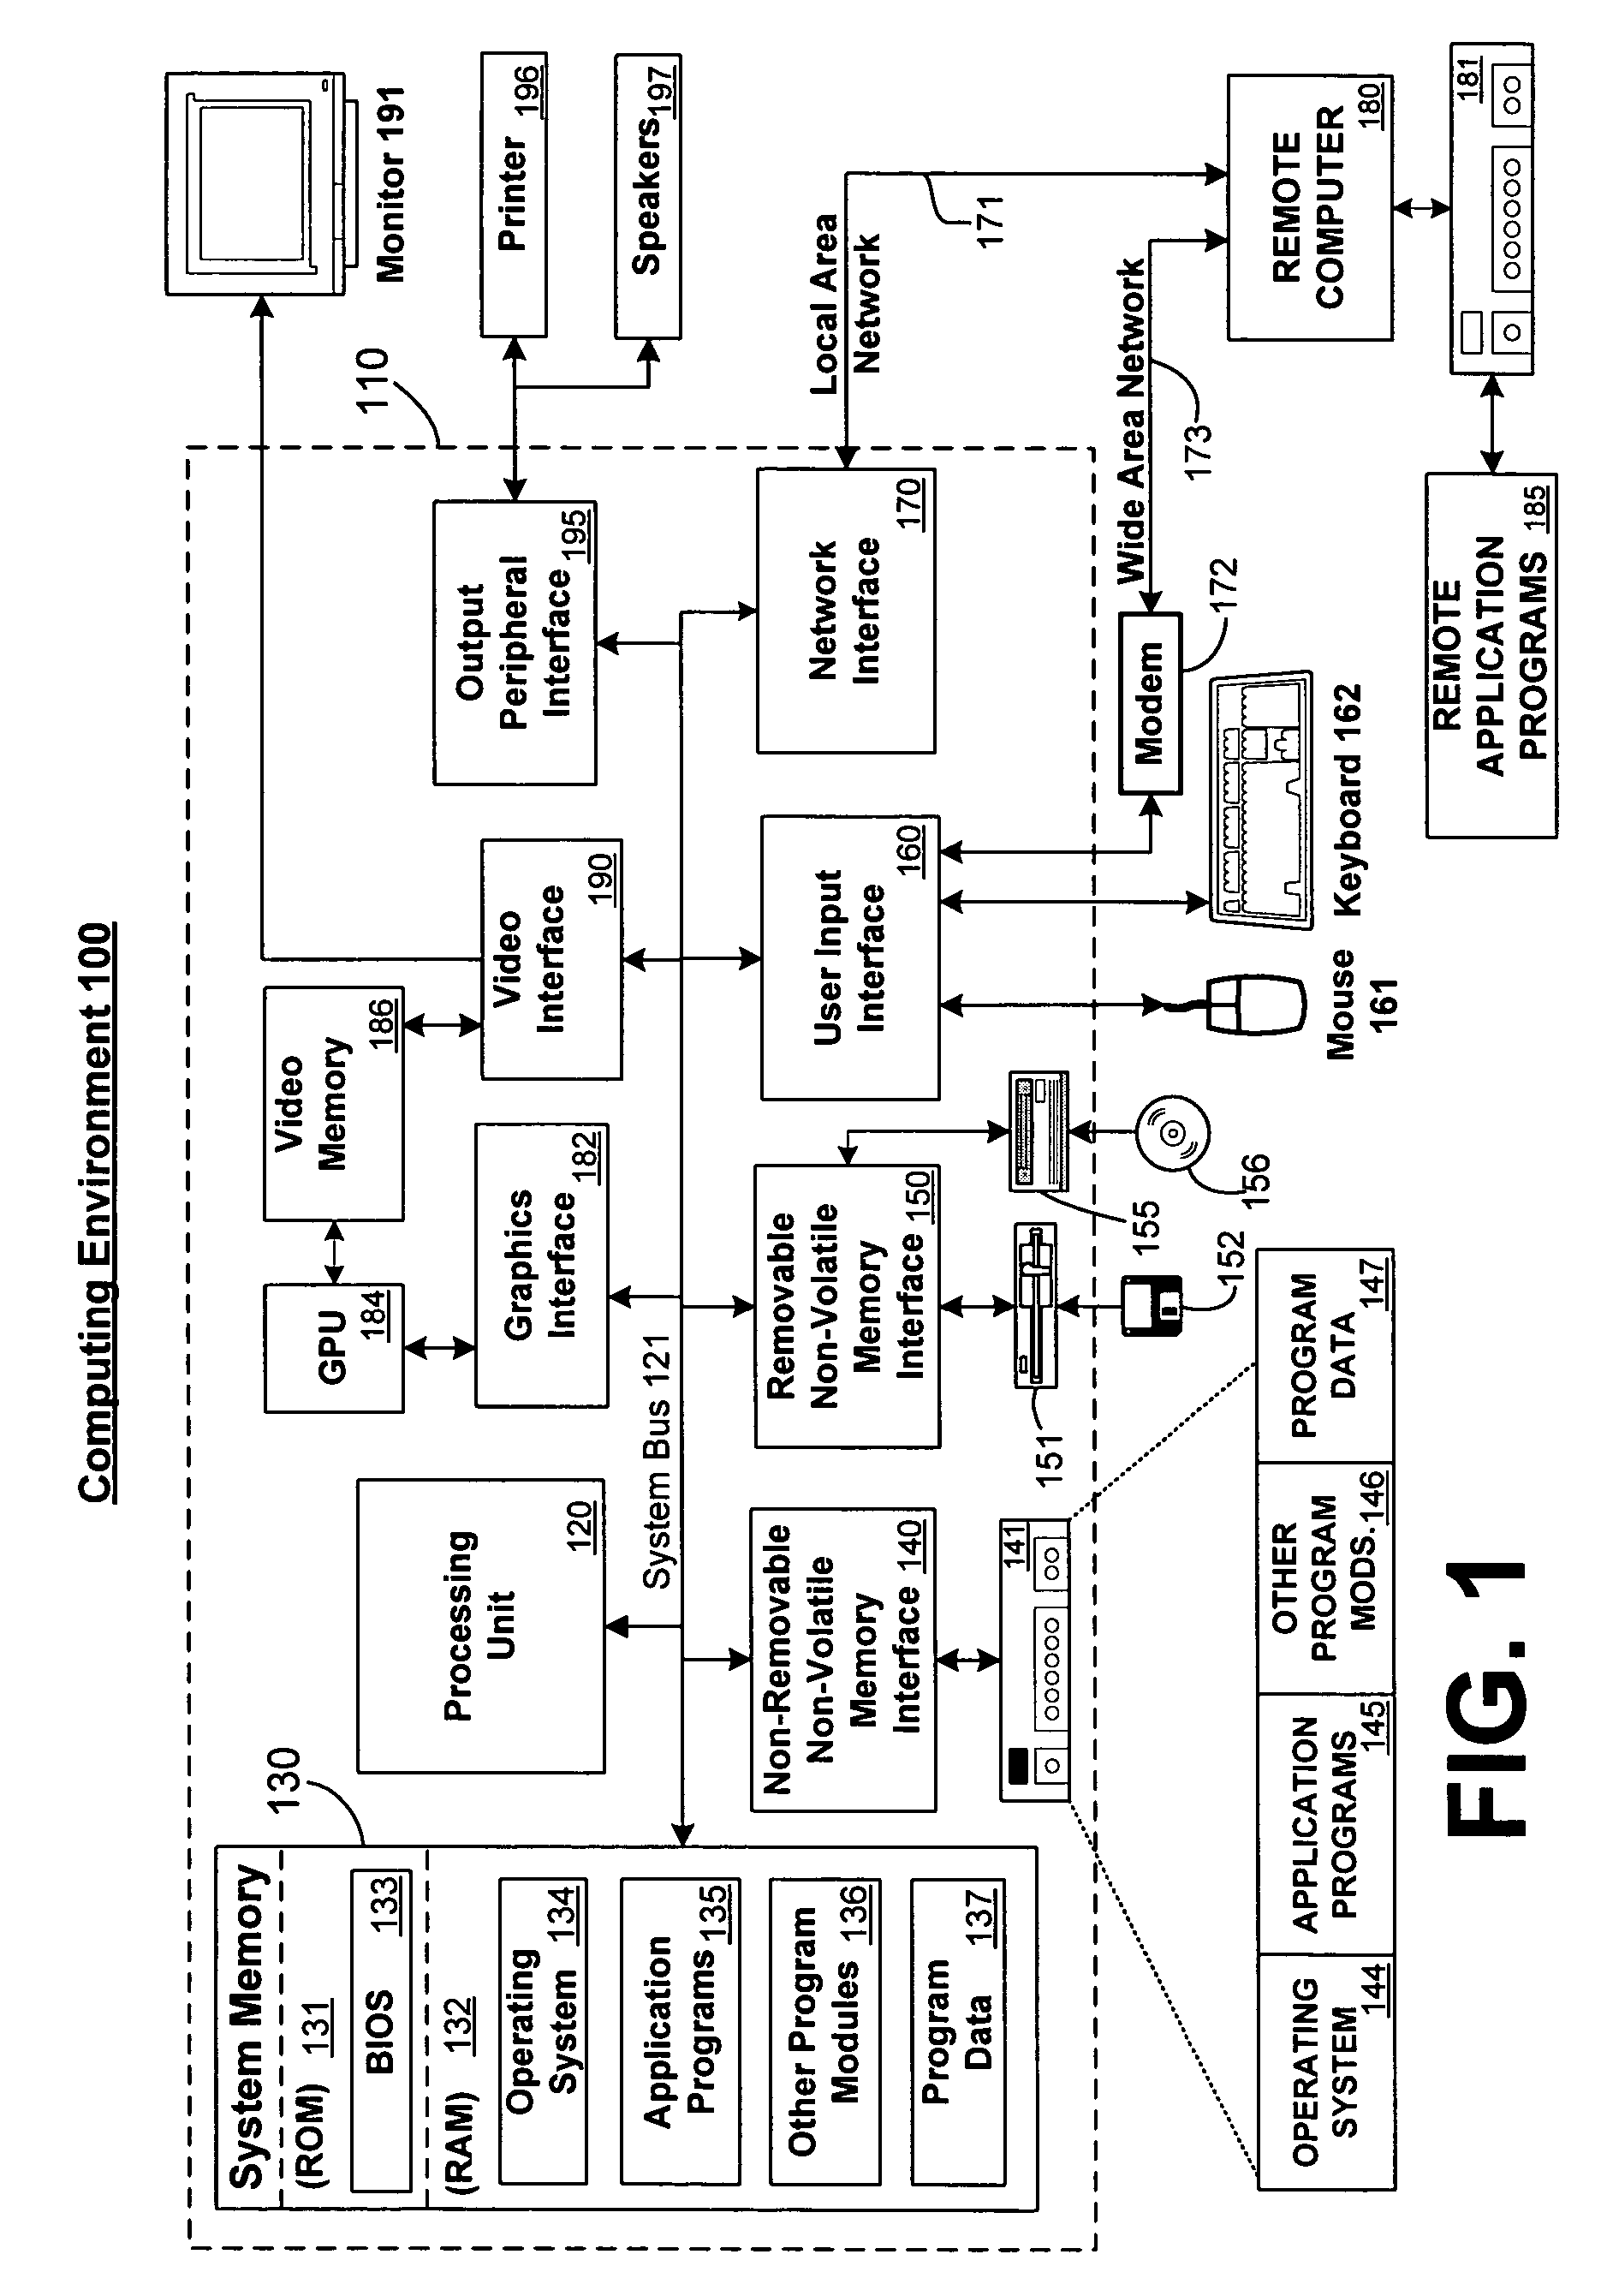 Flexible licensing architecture for licensing digital application